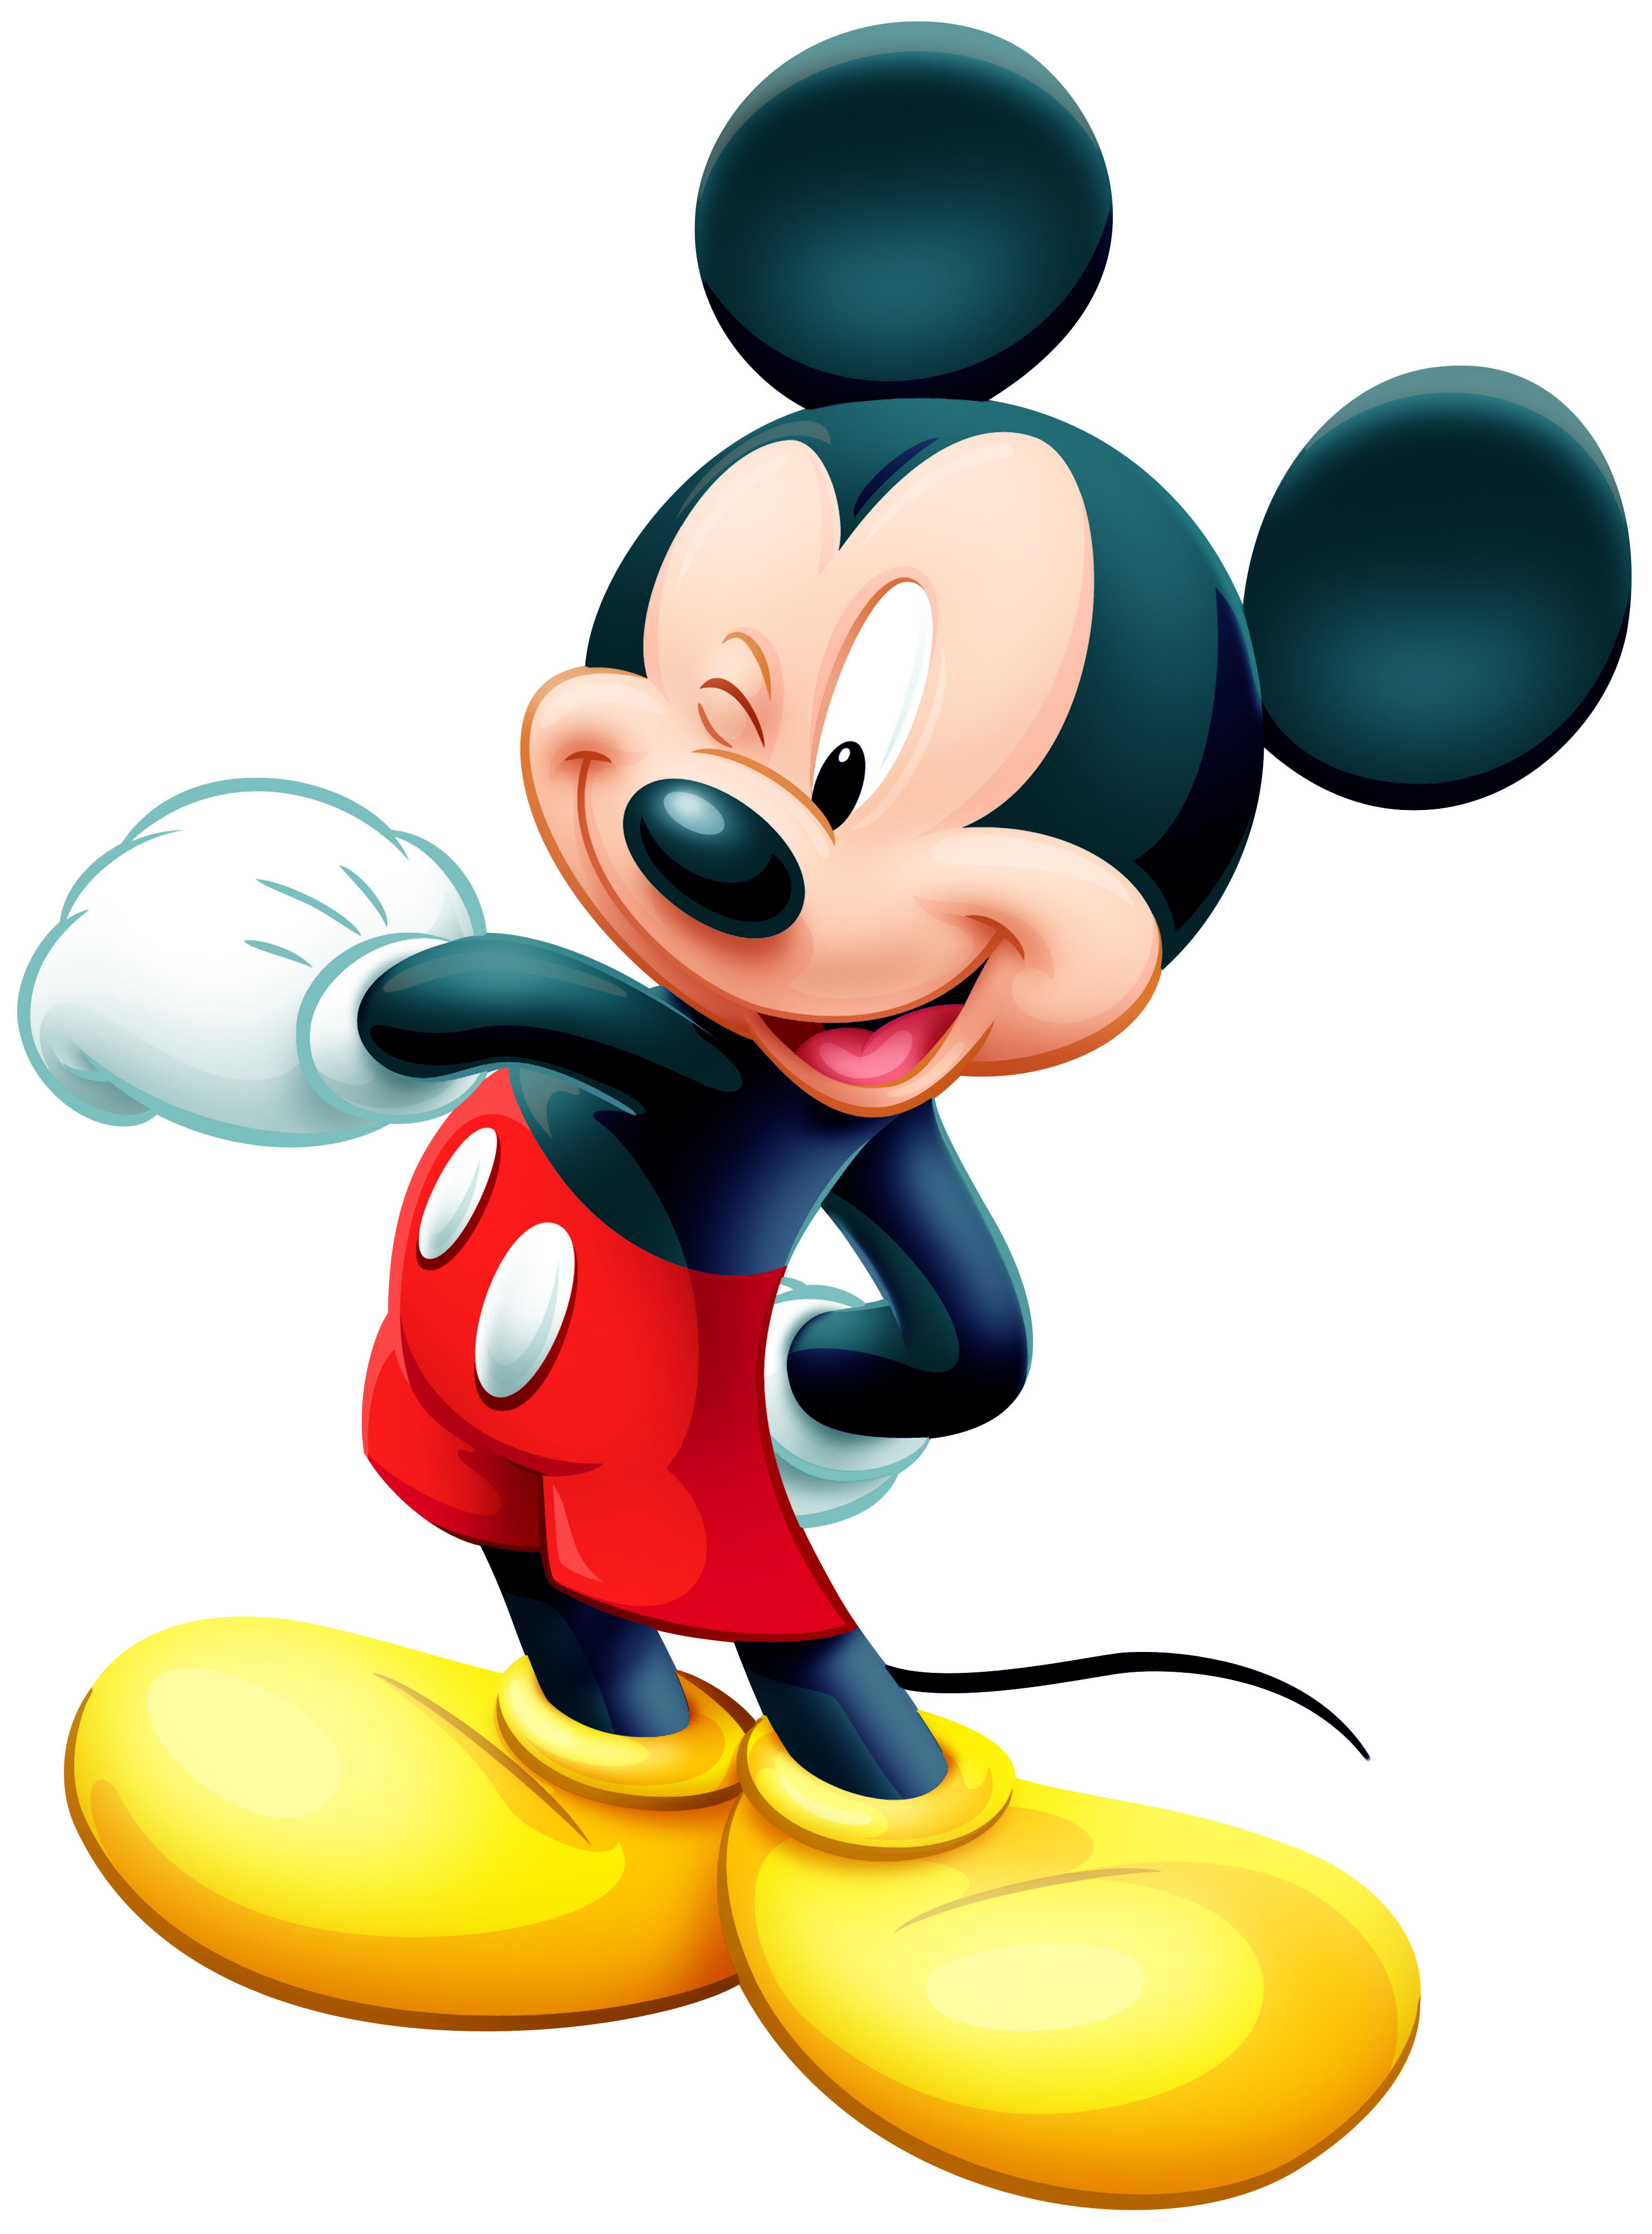 mickey mouse clipart download - photo #22